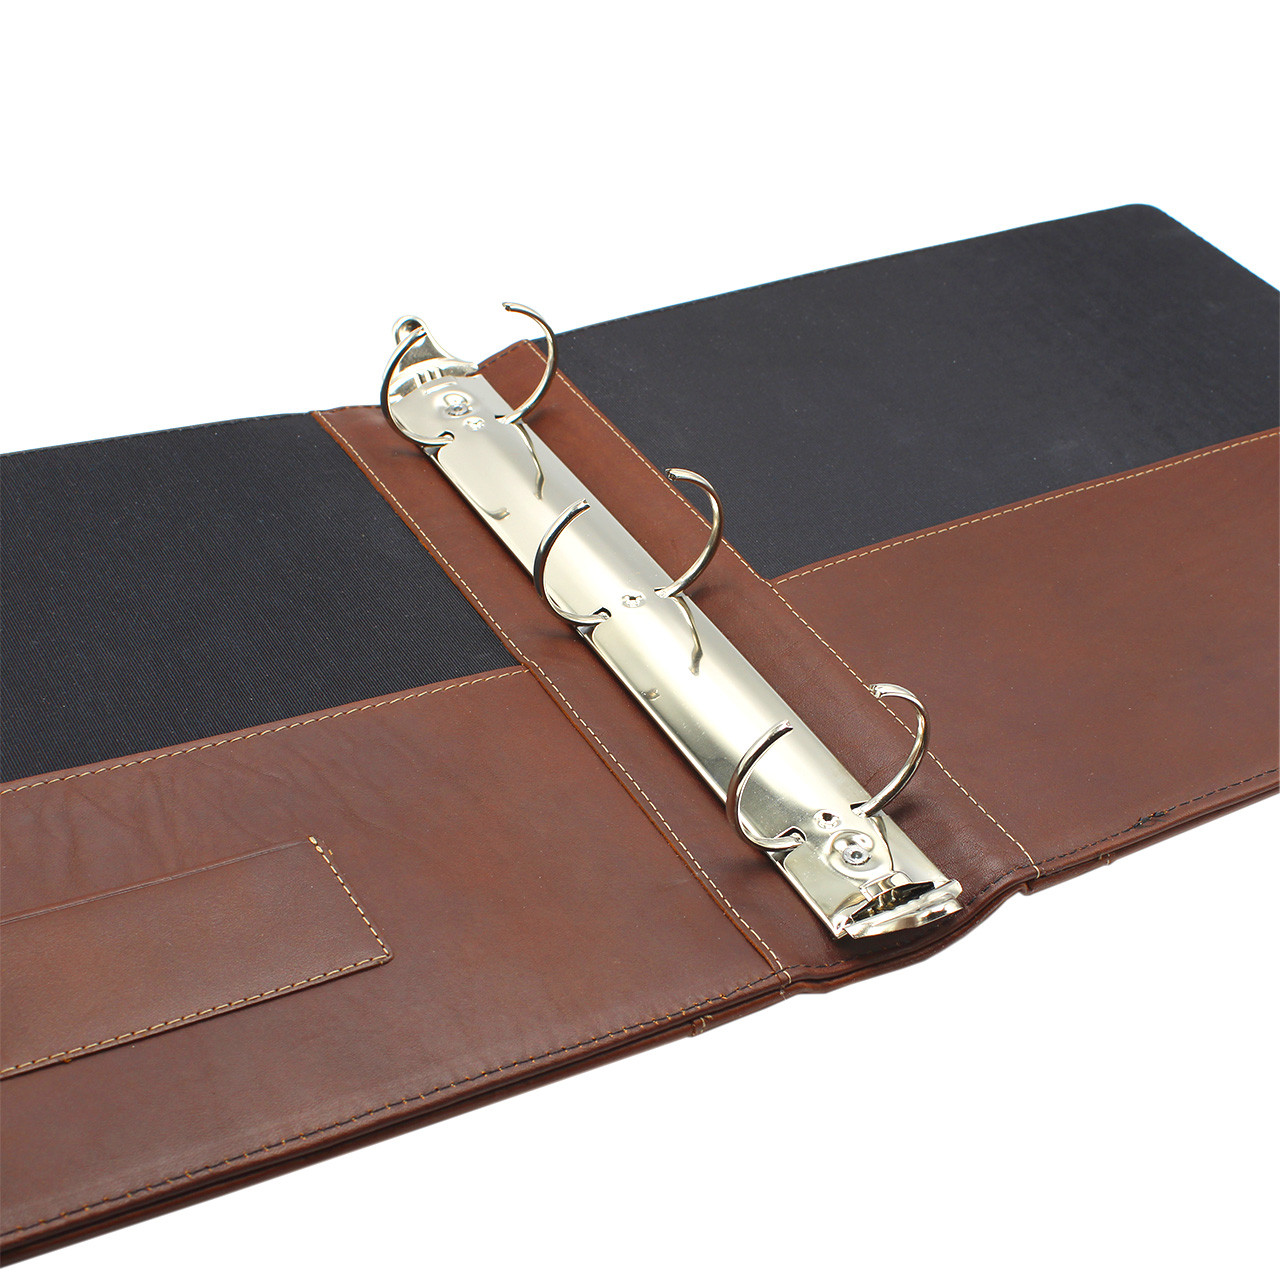 Bonded Leather 12 x 12 3-Ring Binder